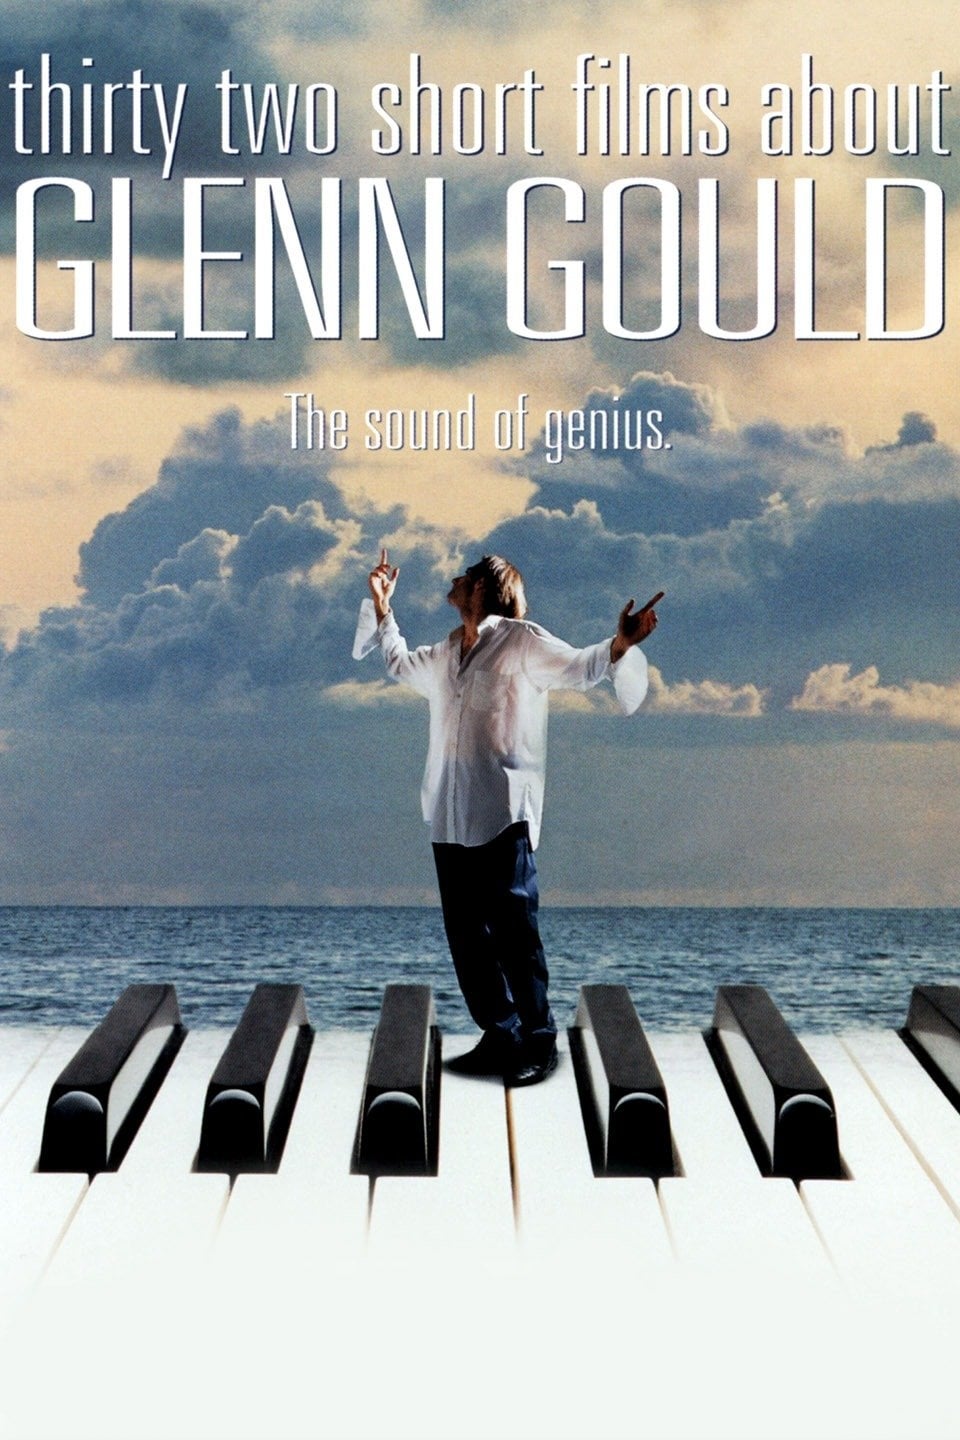 Thirty Two Short Films About Glenn Gould streaming